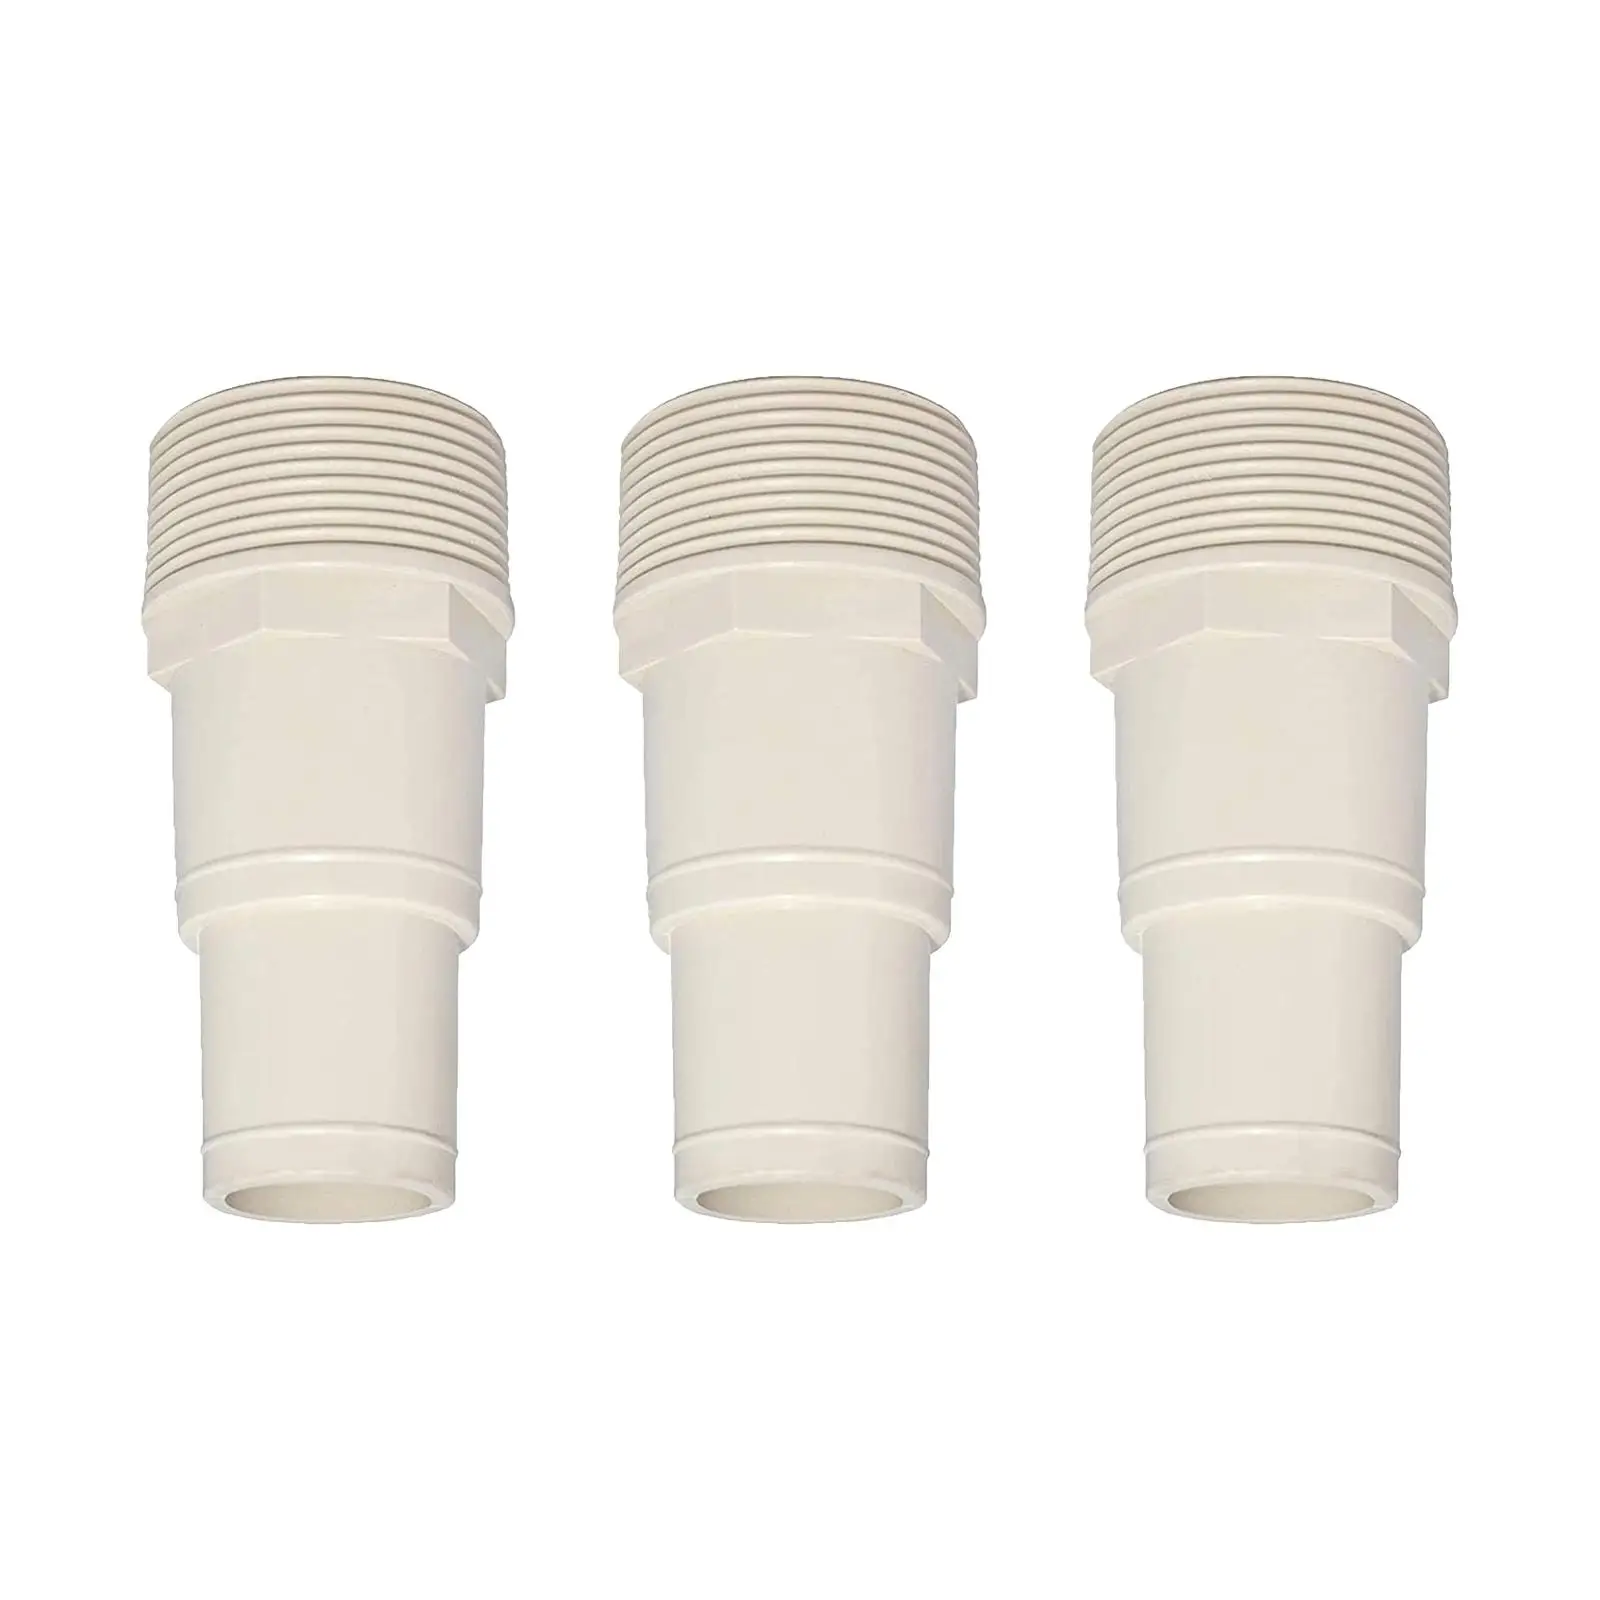 3Pcs 1.5 inch and 1.25 inch Hose Adapters Pool Filter Pump Hose Adapter for above Ground Pool Pump Skimmer Plumbing Connection